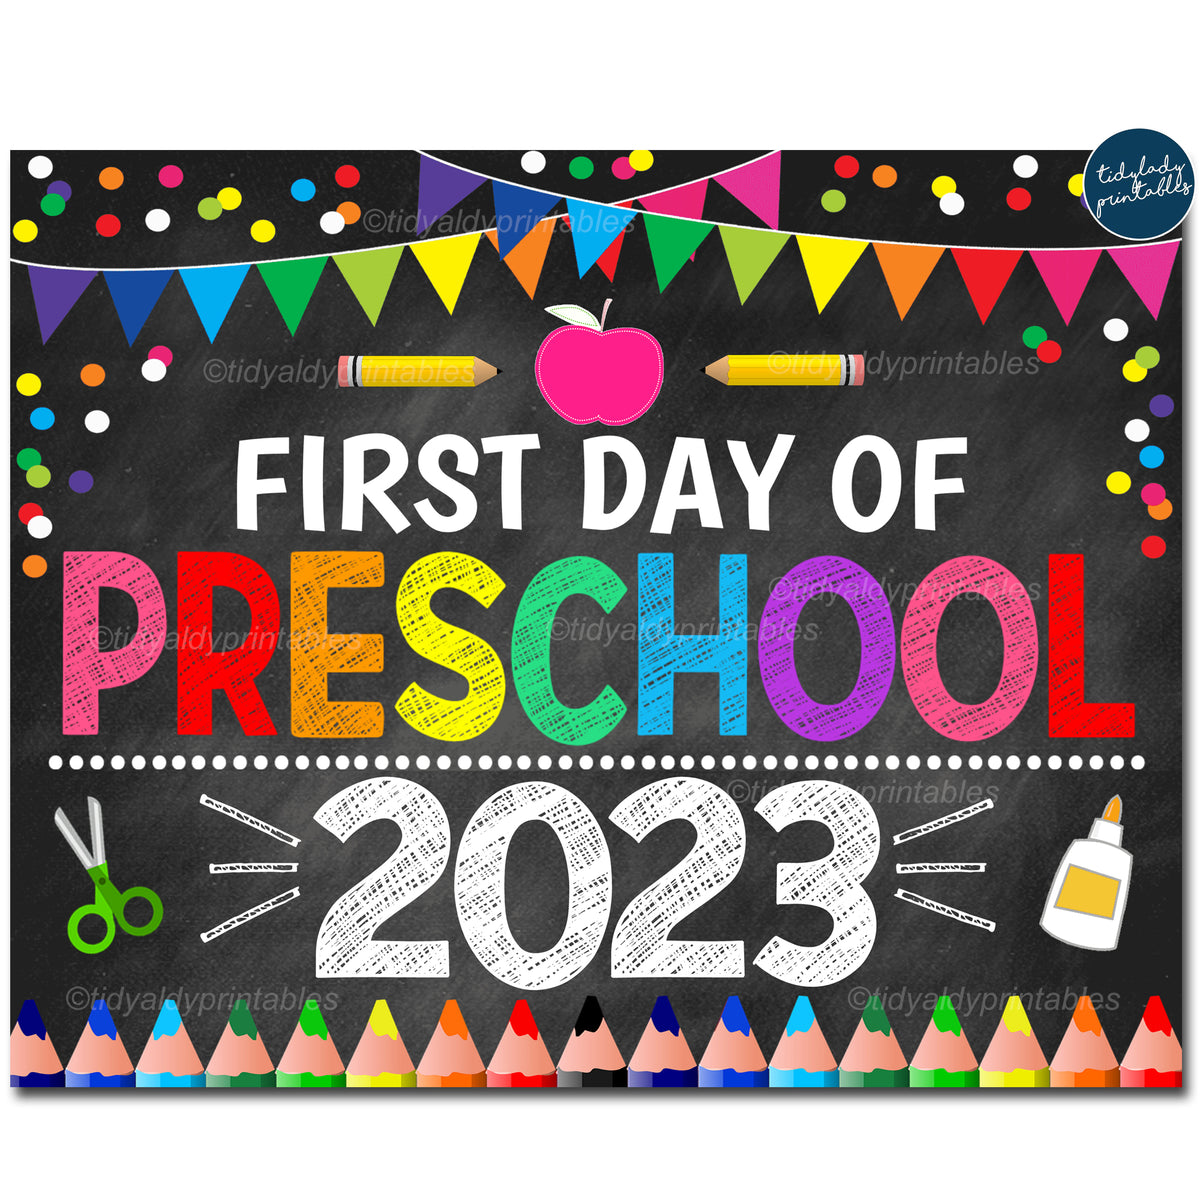 First Day of Preschool 2023 School Sign TidyLady Printables